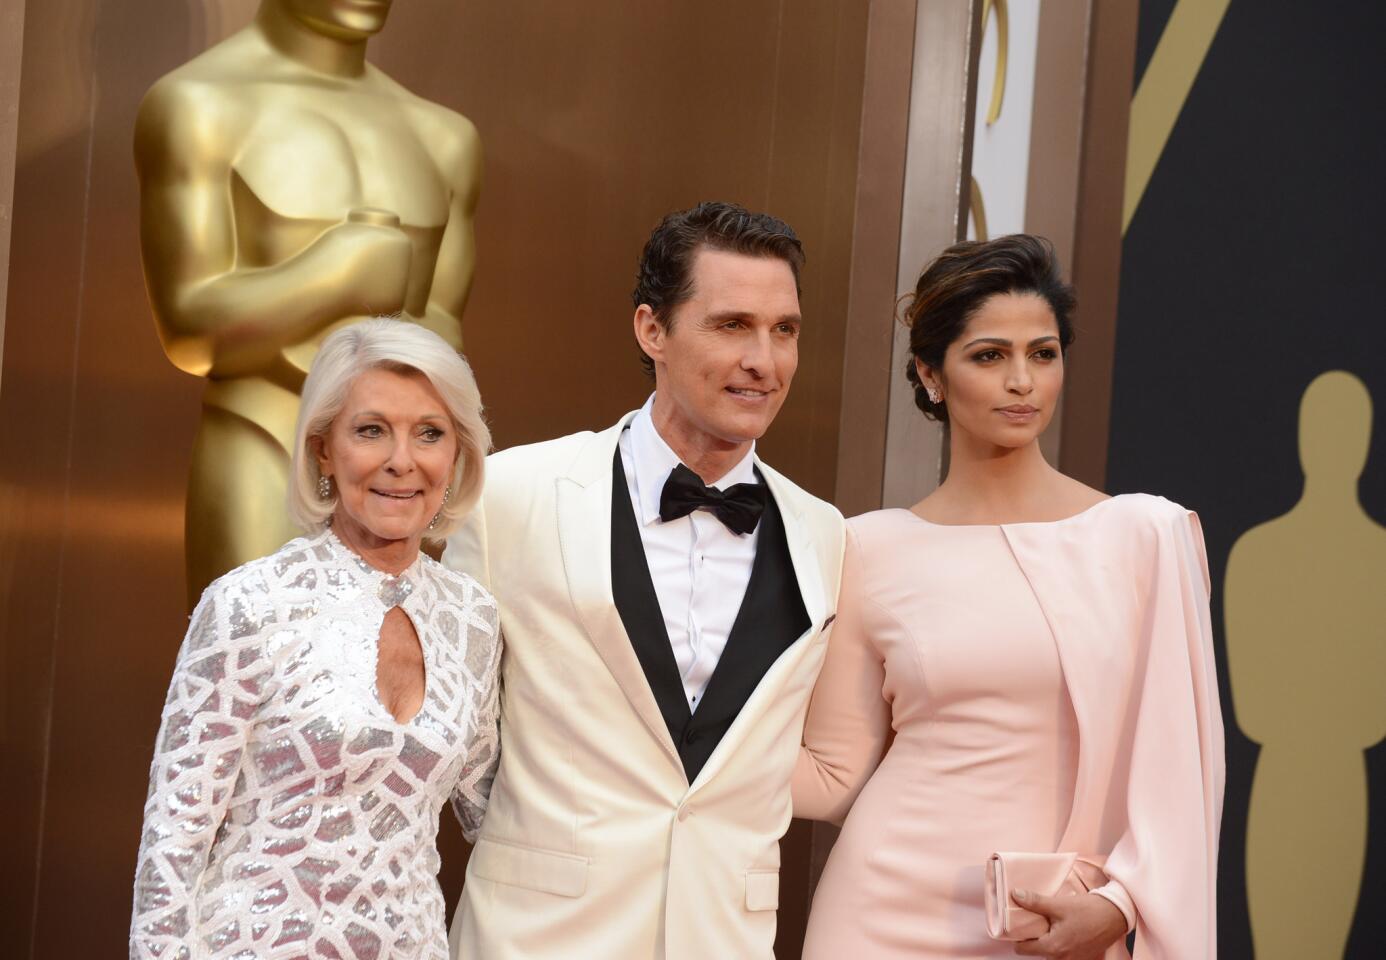 Matthew McConaughey is flanked by his mother Mary Kathlene McCabe, left, and wife Camila Alves, right, on the red carpet at the 86th Annual Academy Awards on March 2, 2014.